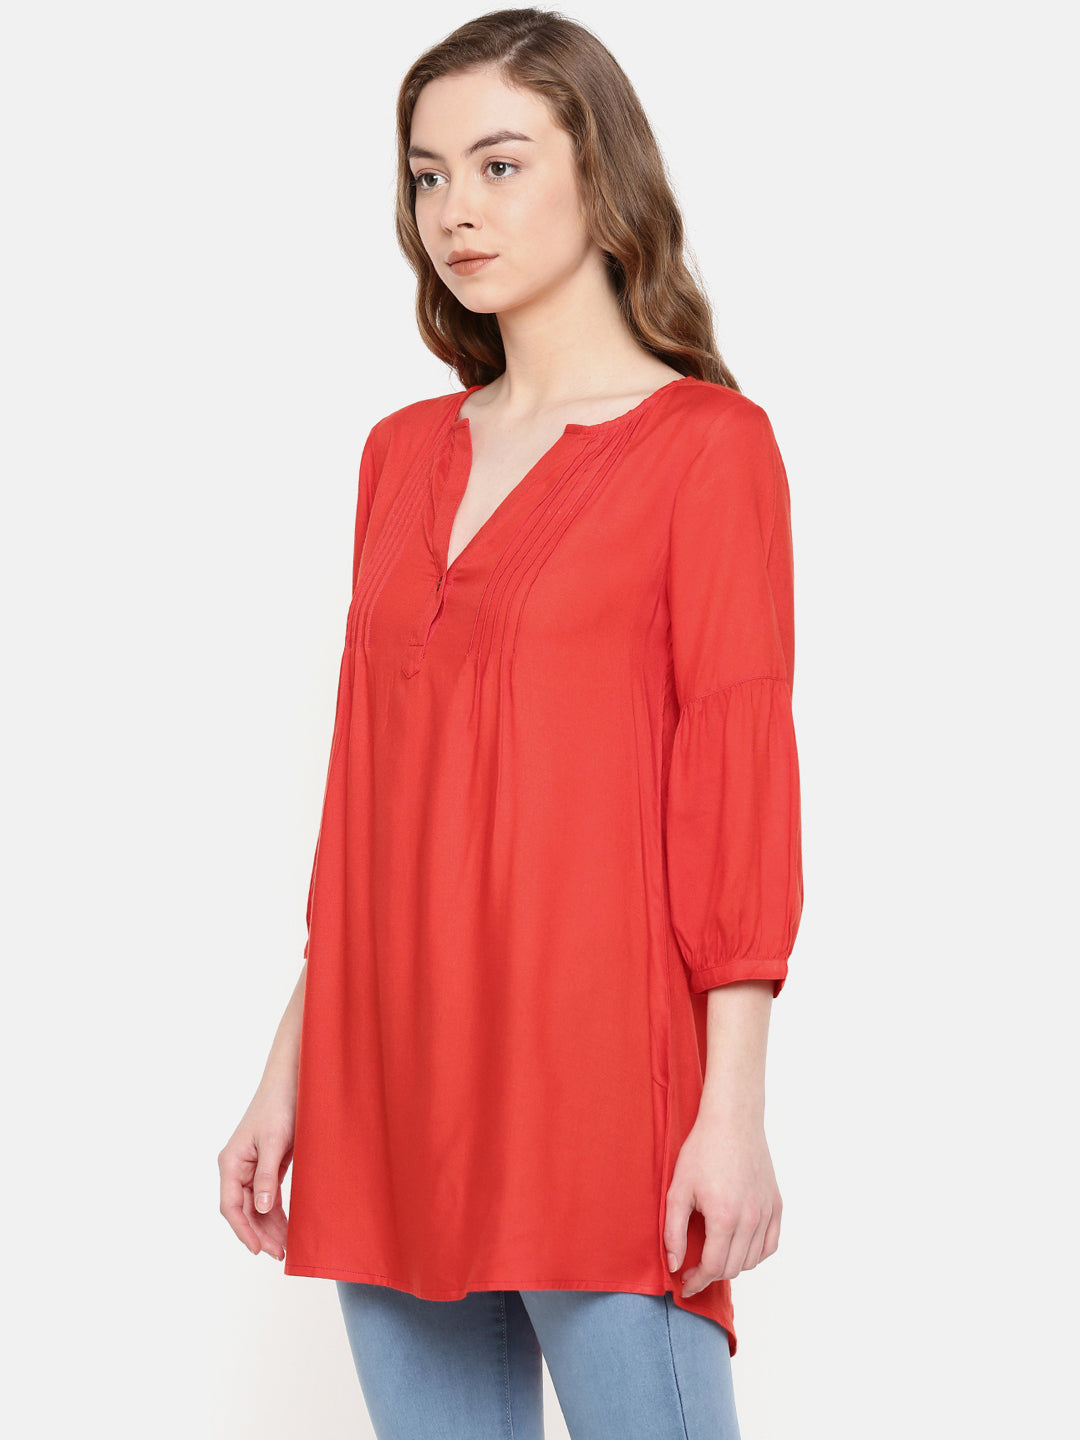 V neck red tunic top